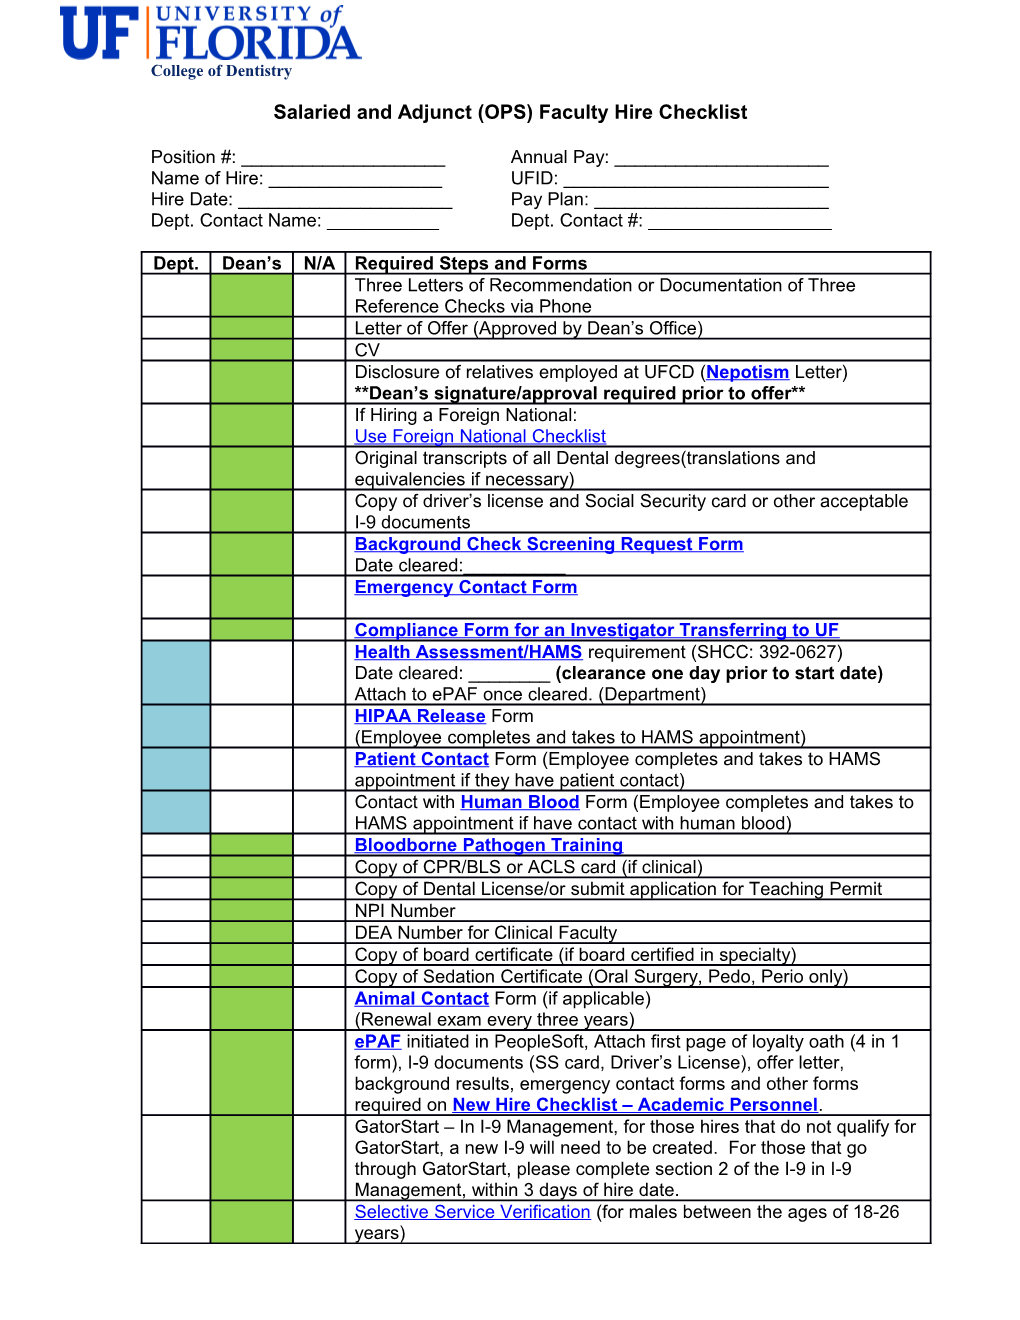 Salaried and Adjunct (OPS) Faculty Hire Checklist